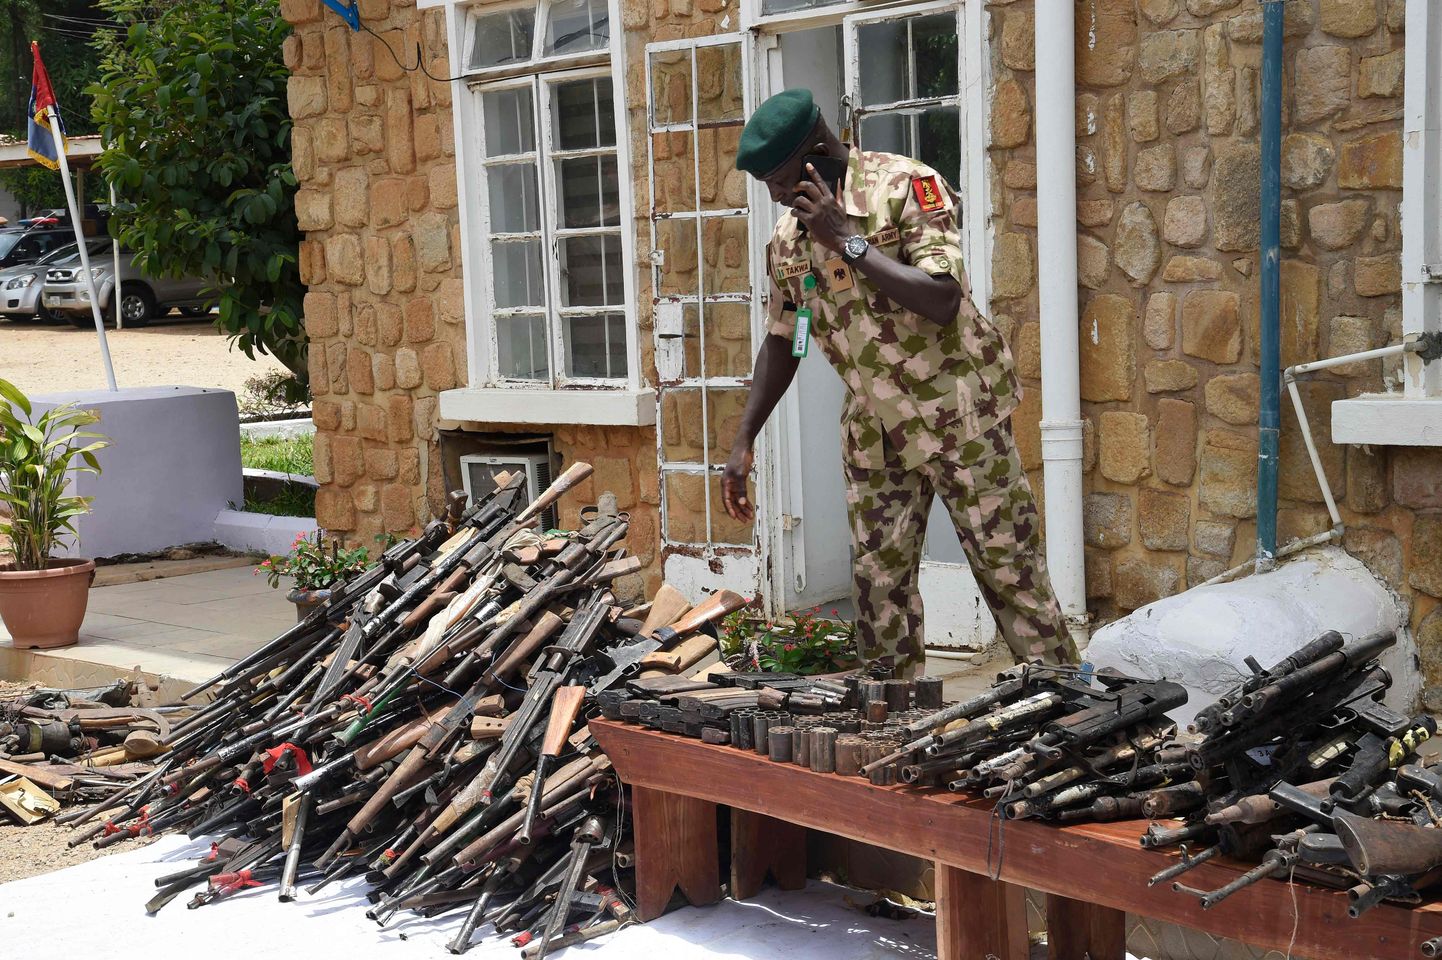 A Nigerian soldier is seen on April 21, 2022 amid small arms and light weapons recovered from bandits during Operation Safe Haven and during the military mop up in Jos and surrounding areas in Plateau State in northcentral Nigeria. - The Nigerian military under the platform of Operation Safe Haven has handed over 517 small arms and light weapons recovered recently from bandits to the National Centre for the Control of Small Arms and Light Weapons following successes in checking bloodletting and insecurity occasioned by the proliferation of illicit arms in circulation. (Photo by PIUS UTOMI EKPEI / AFP)